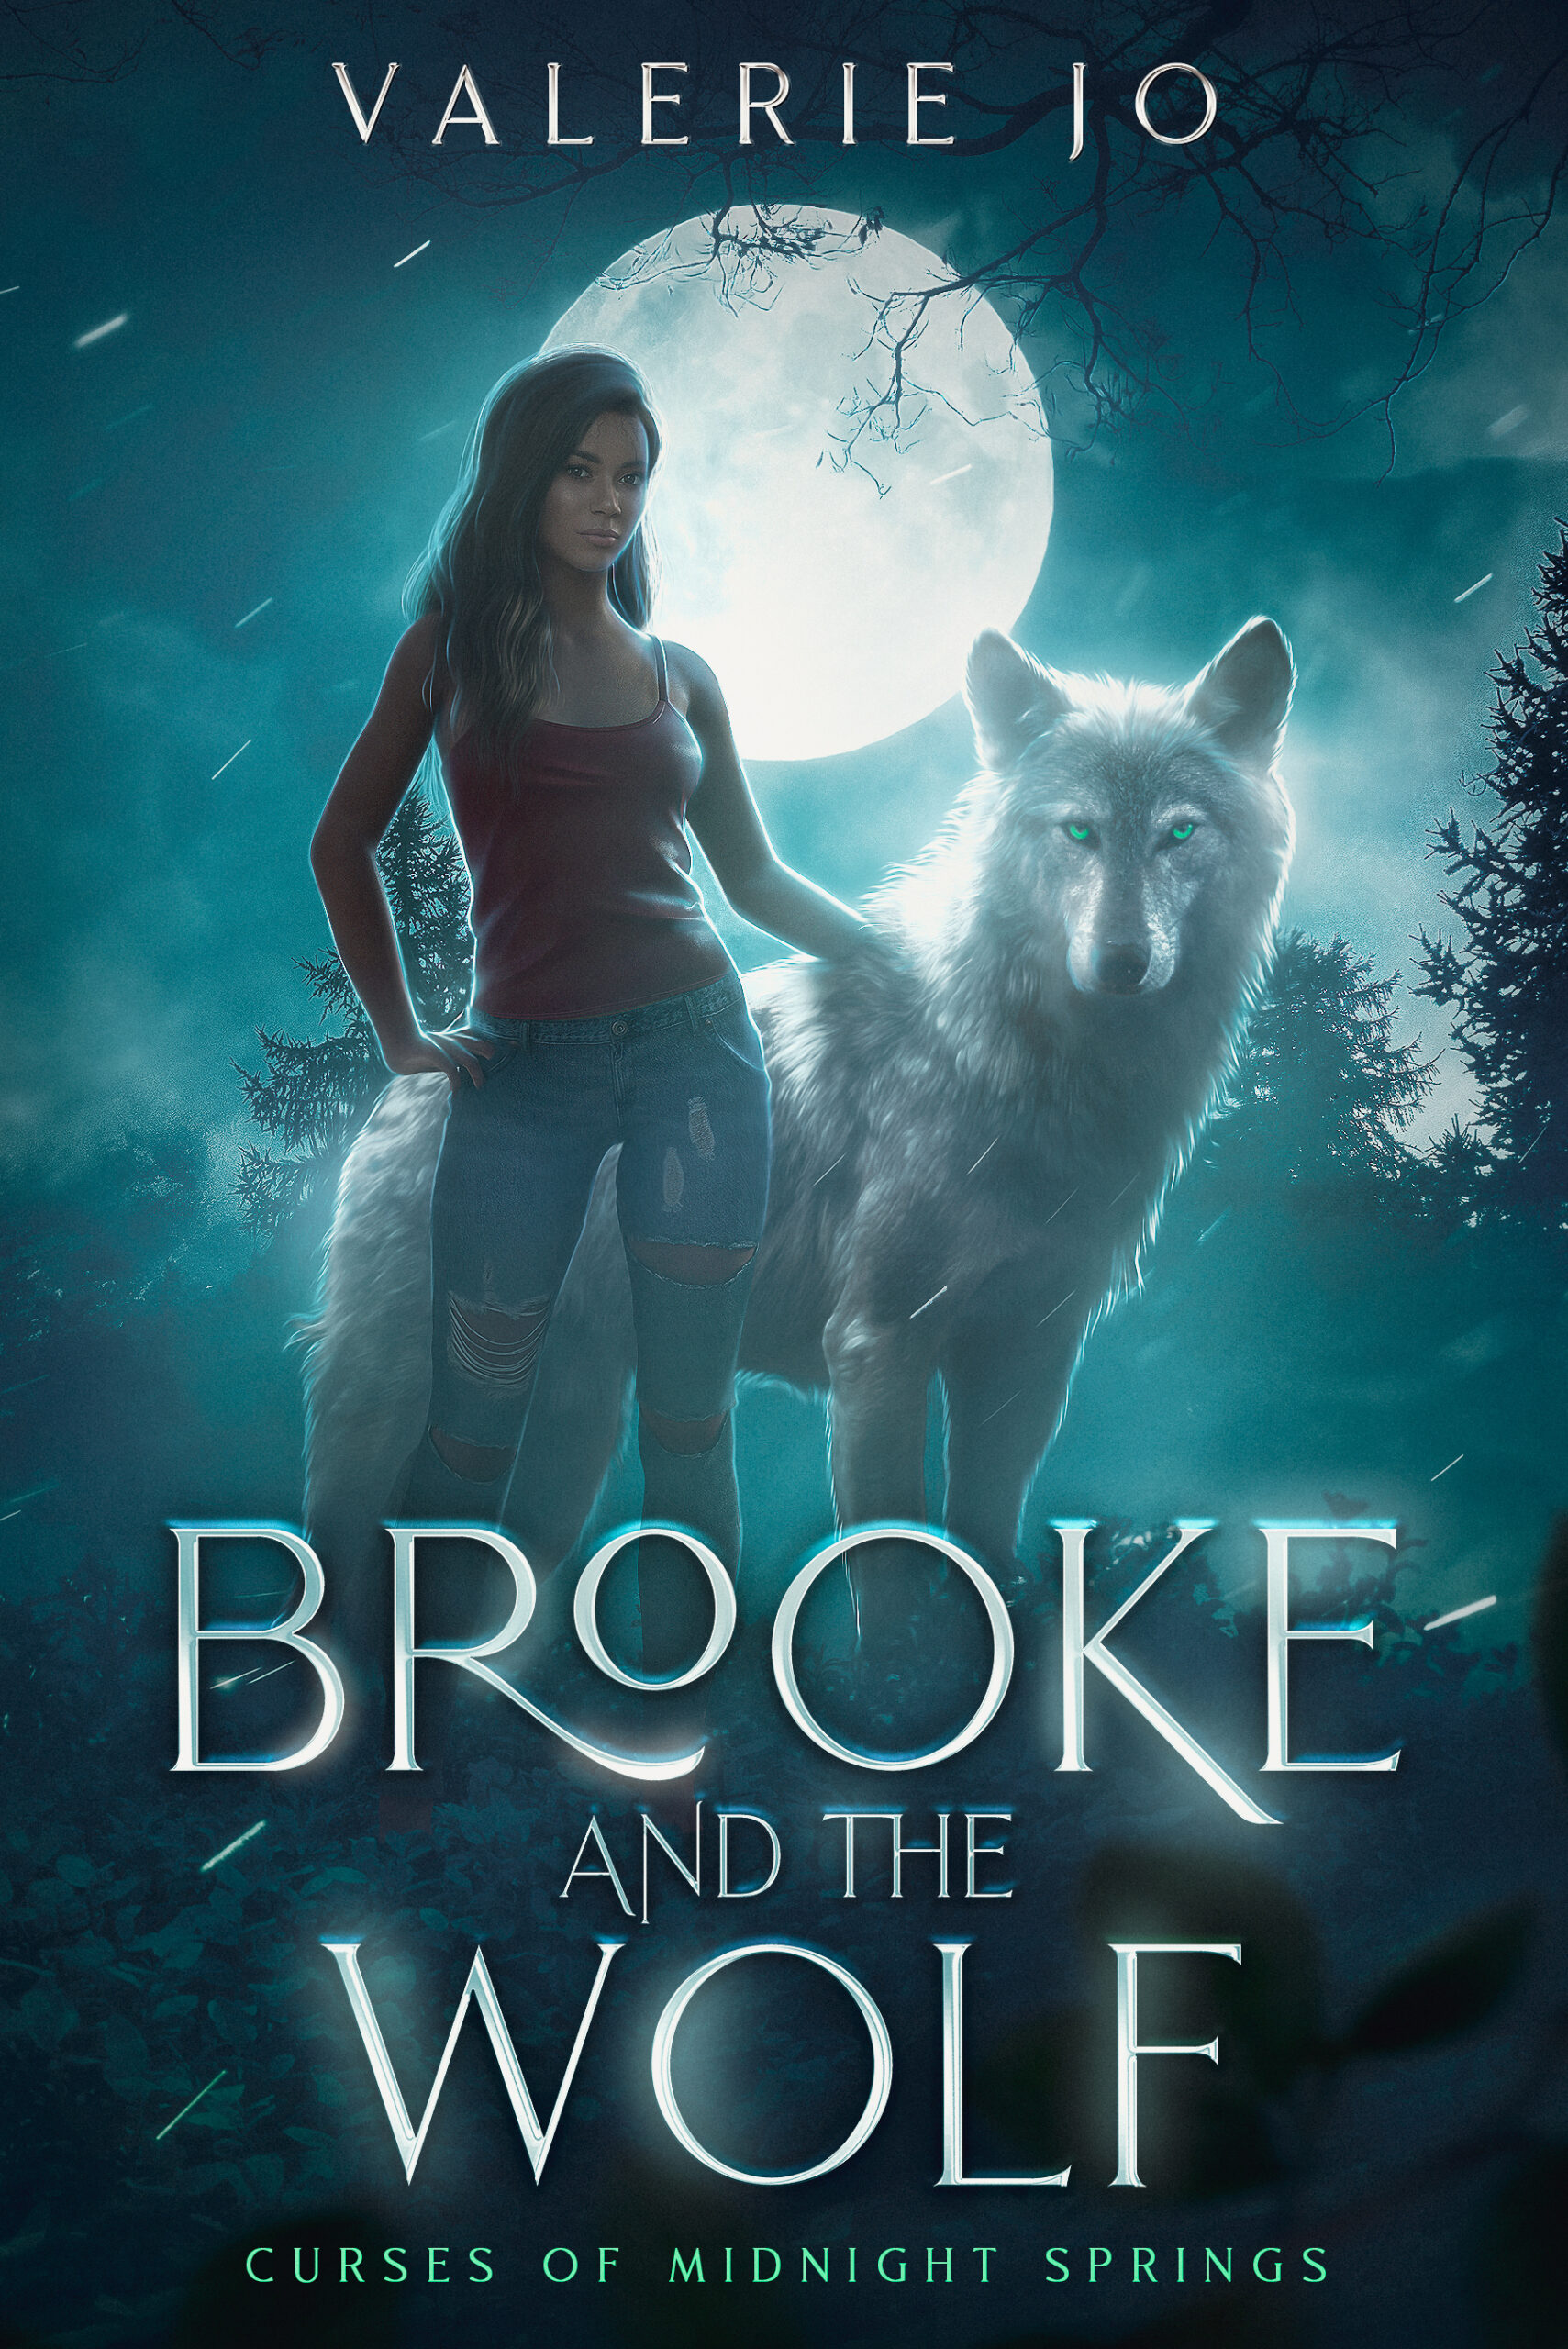 Brooke and the Wolf: Curses of Midnight Springs book cover with Brooke and the wolf on the front.